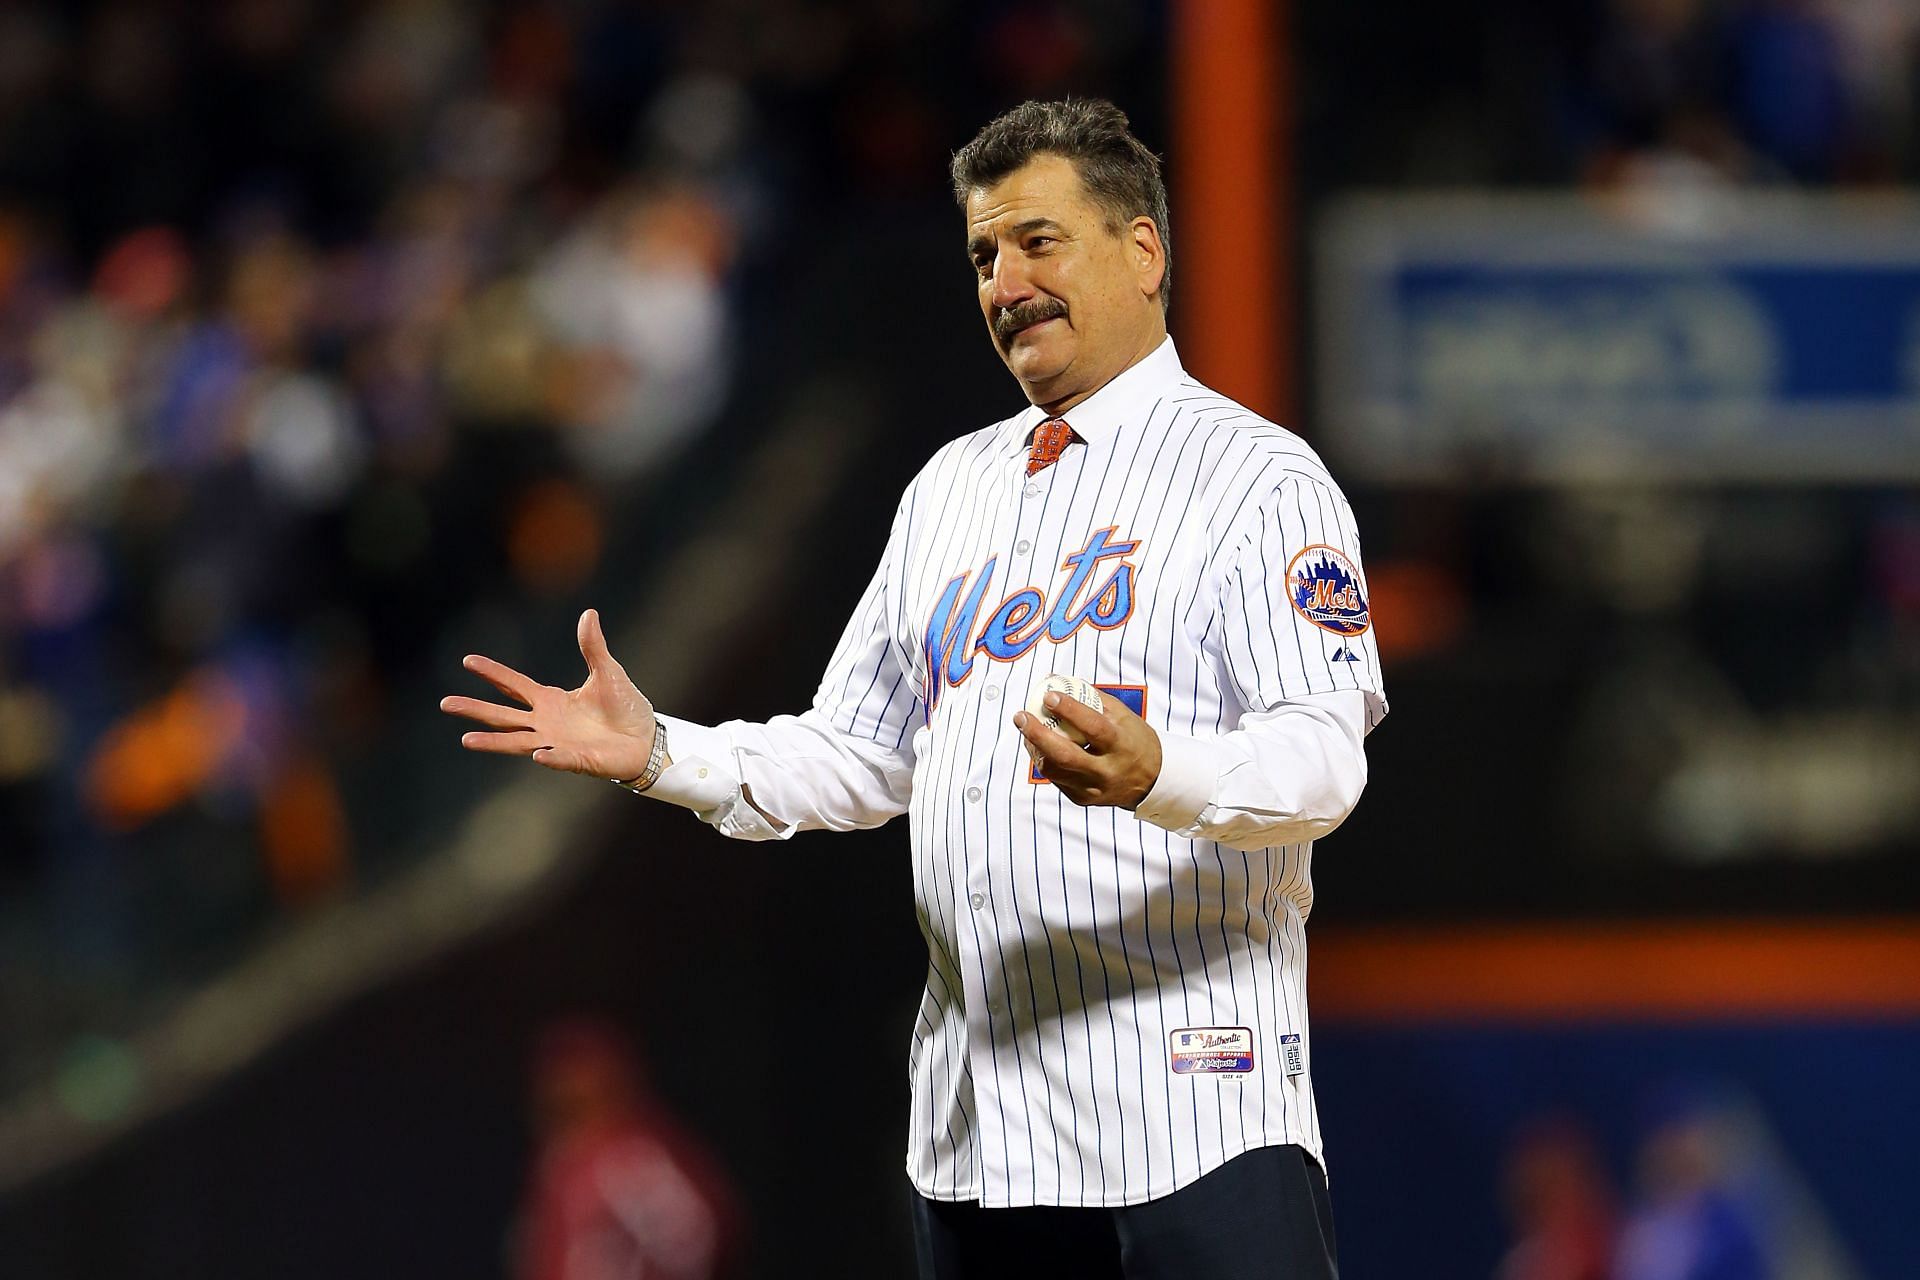 Keith Hernandez stopped to buy a pretzel in the middle of another Mets loss